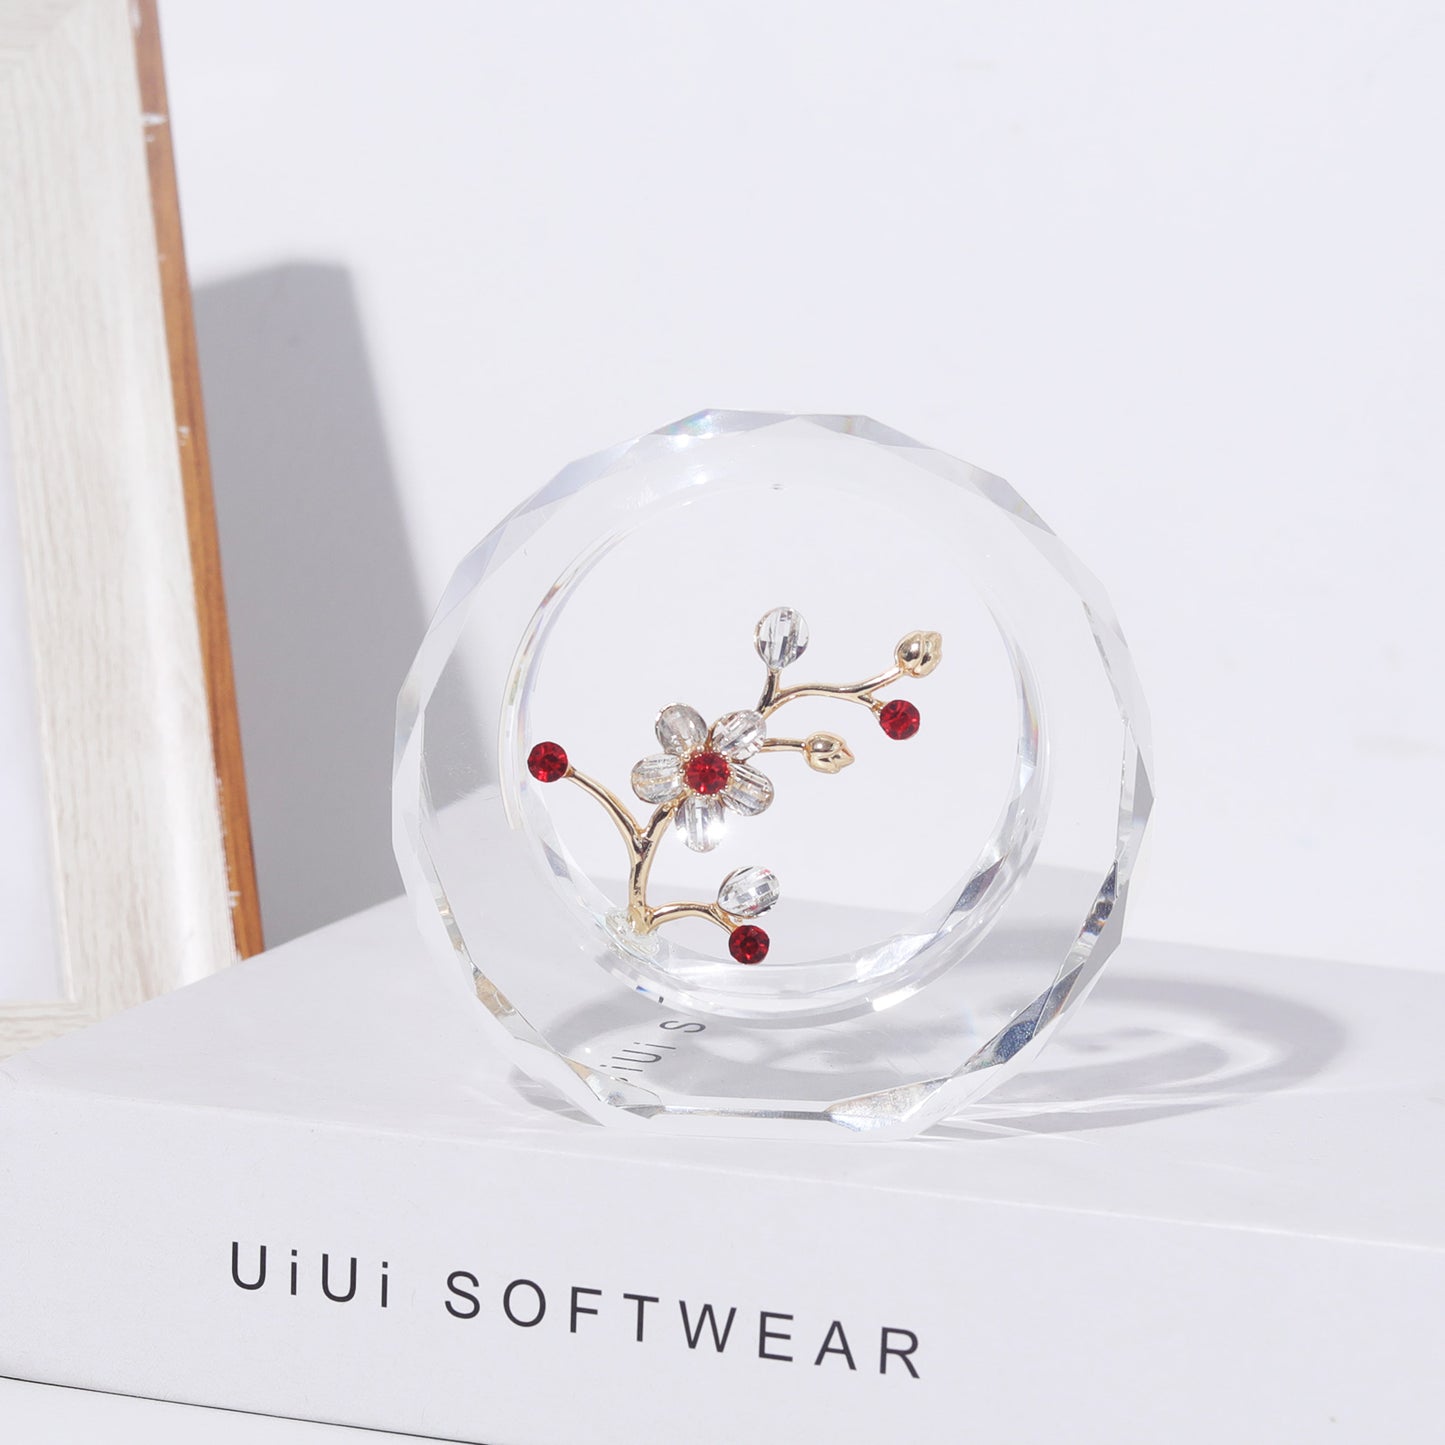 Clear Plum Blossom Figurine with an Outer Circular Ring for Home Decor